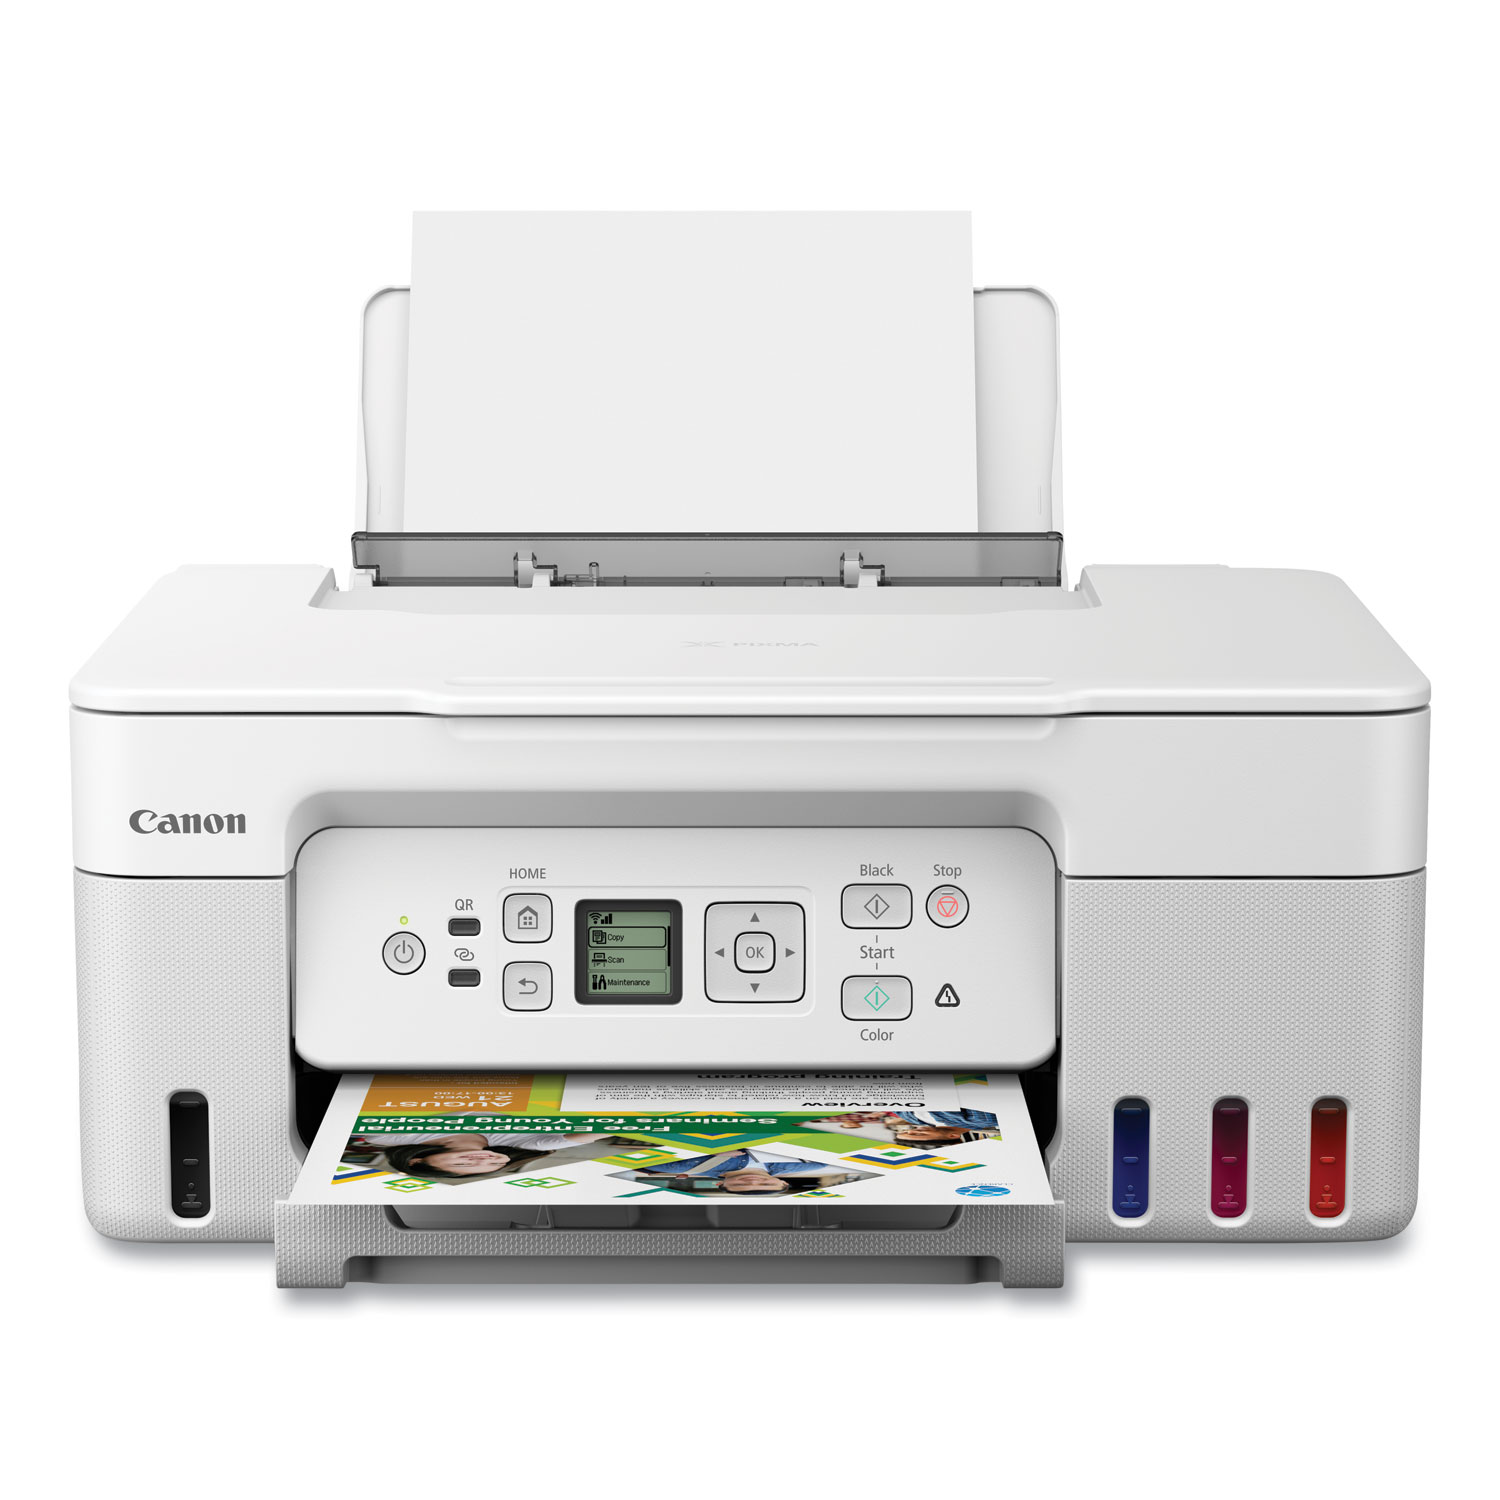 Canon MegaTank G3270 All-in-One Wireless Inkjet Printer. for Home Use,  Print, Scan and Copy, Black